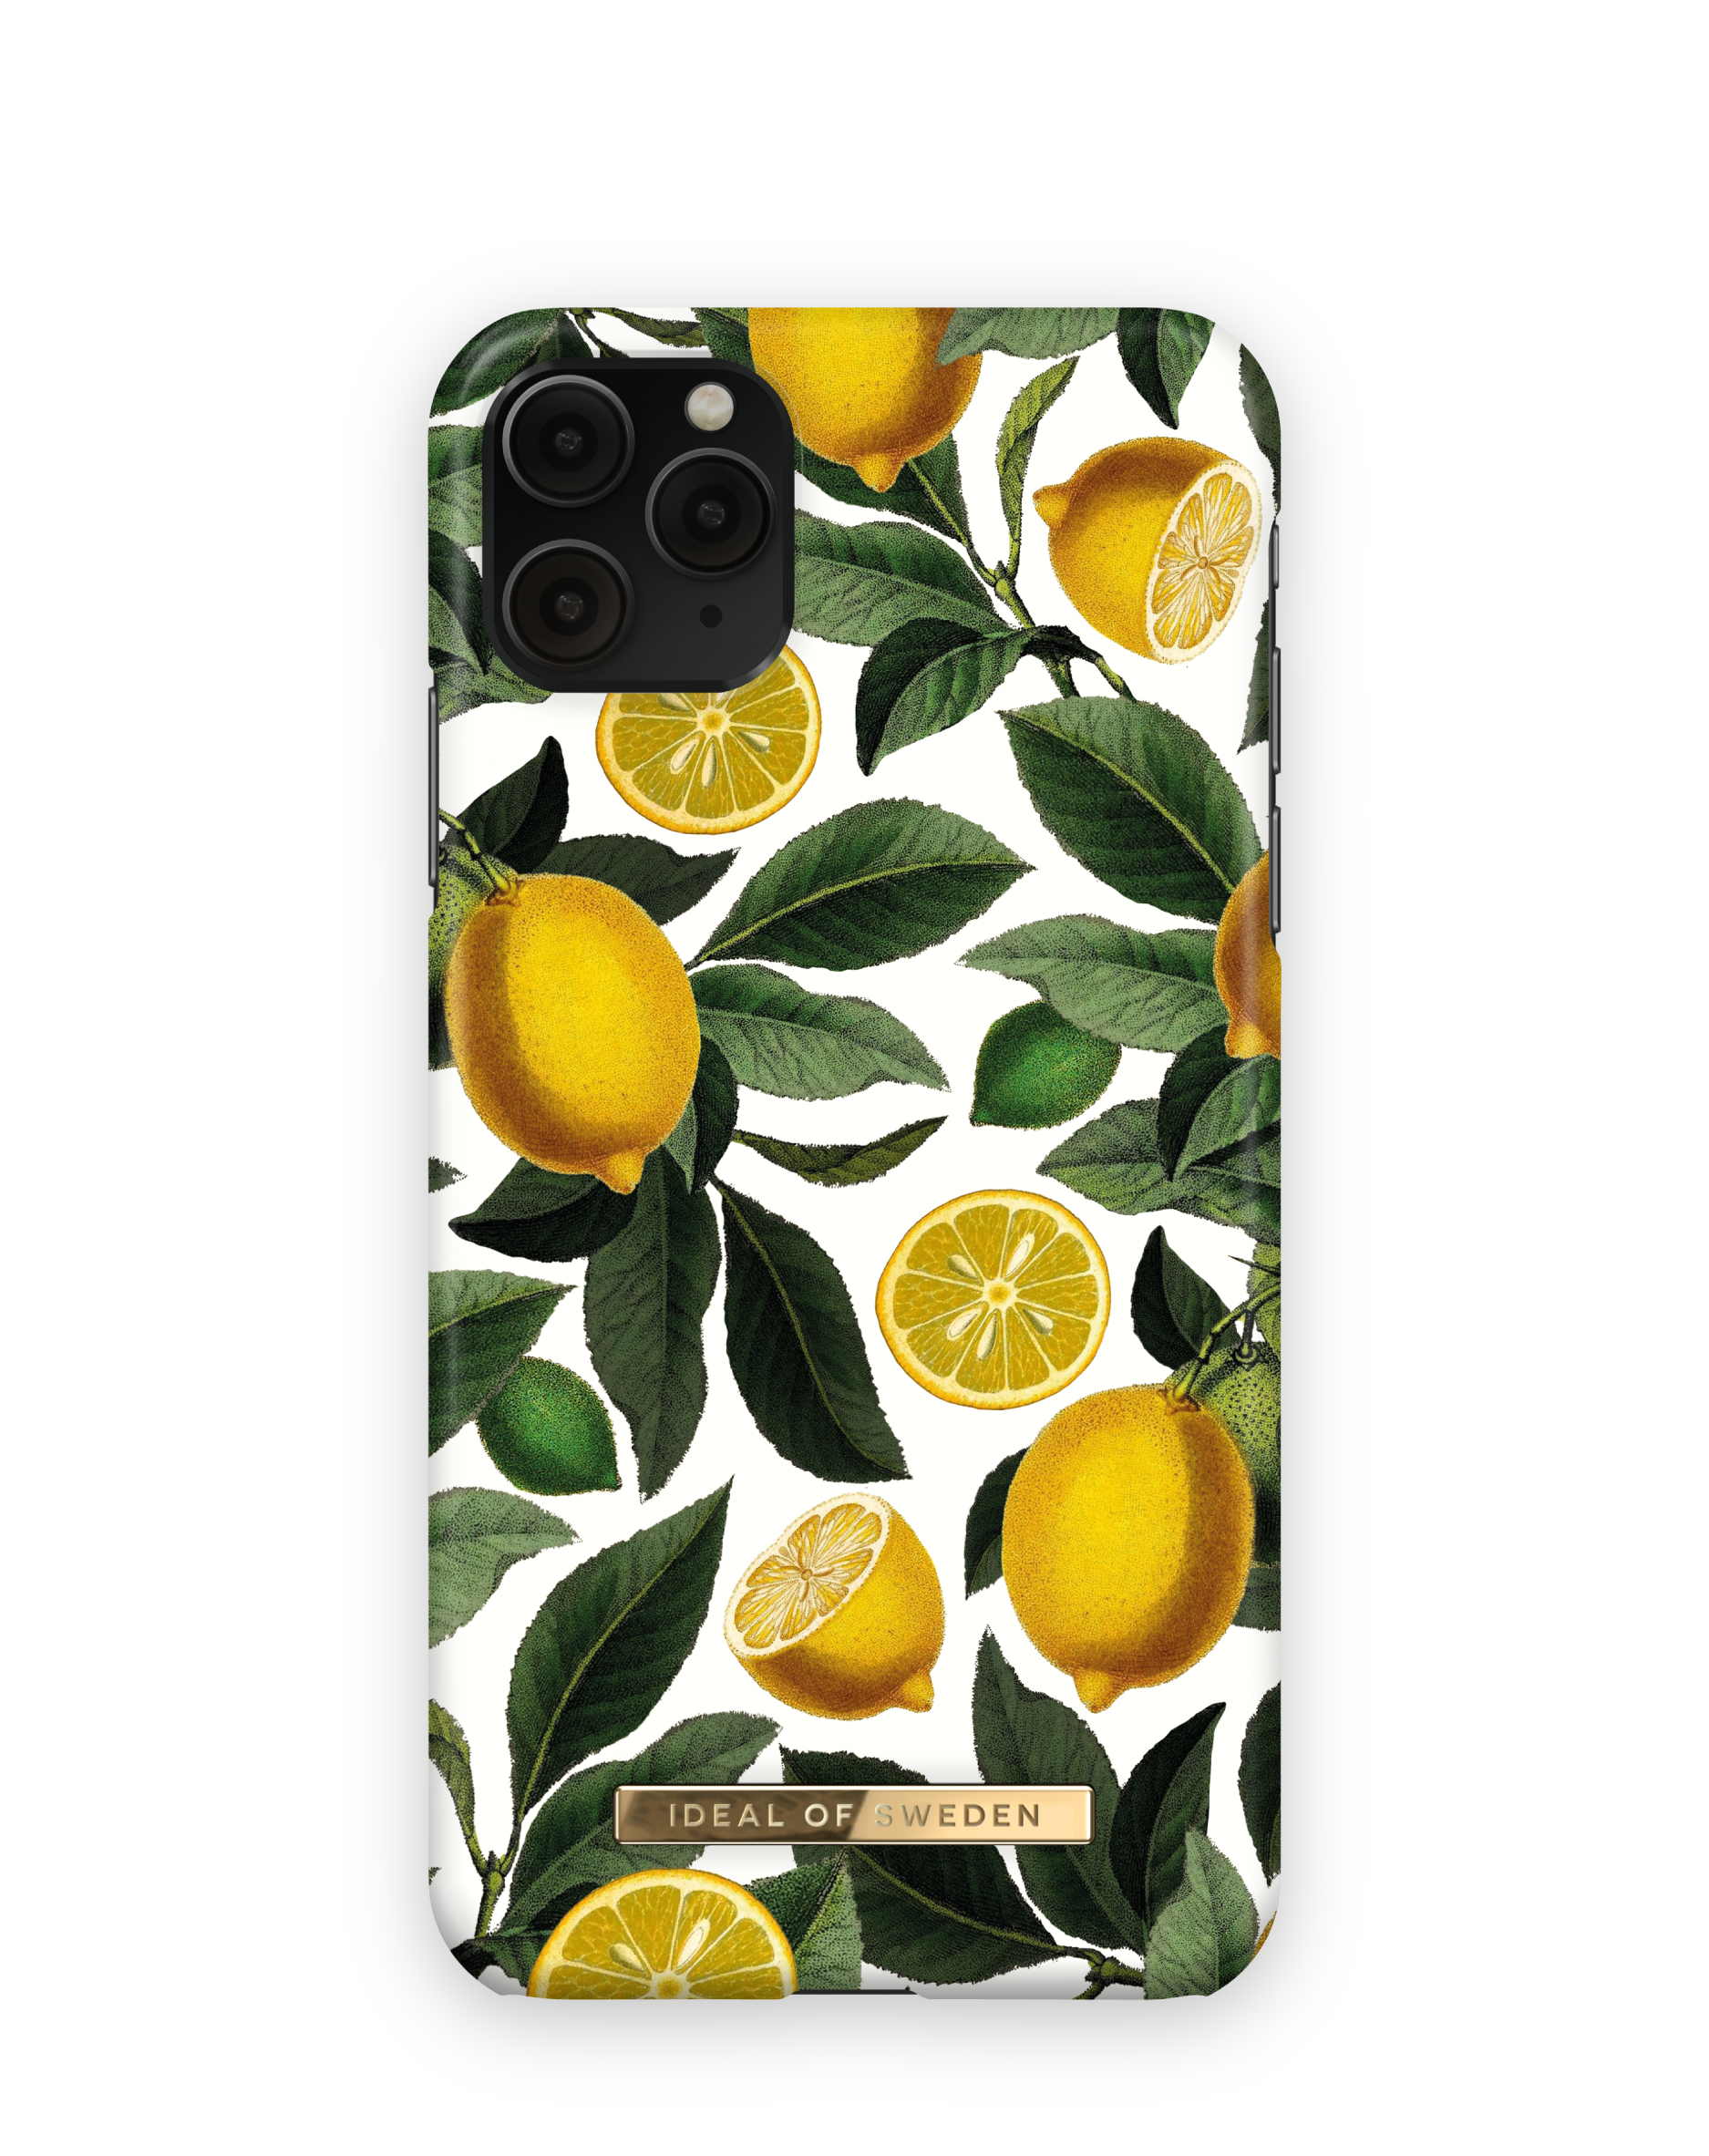 Backcover, 11 XS SWEDEN Pro Max, Apple iPhone IDFCSS20-I1965-196, iPhone Bliss Apple, Max, OF Lemon IDEAL Apple